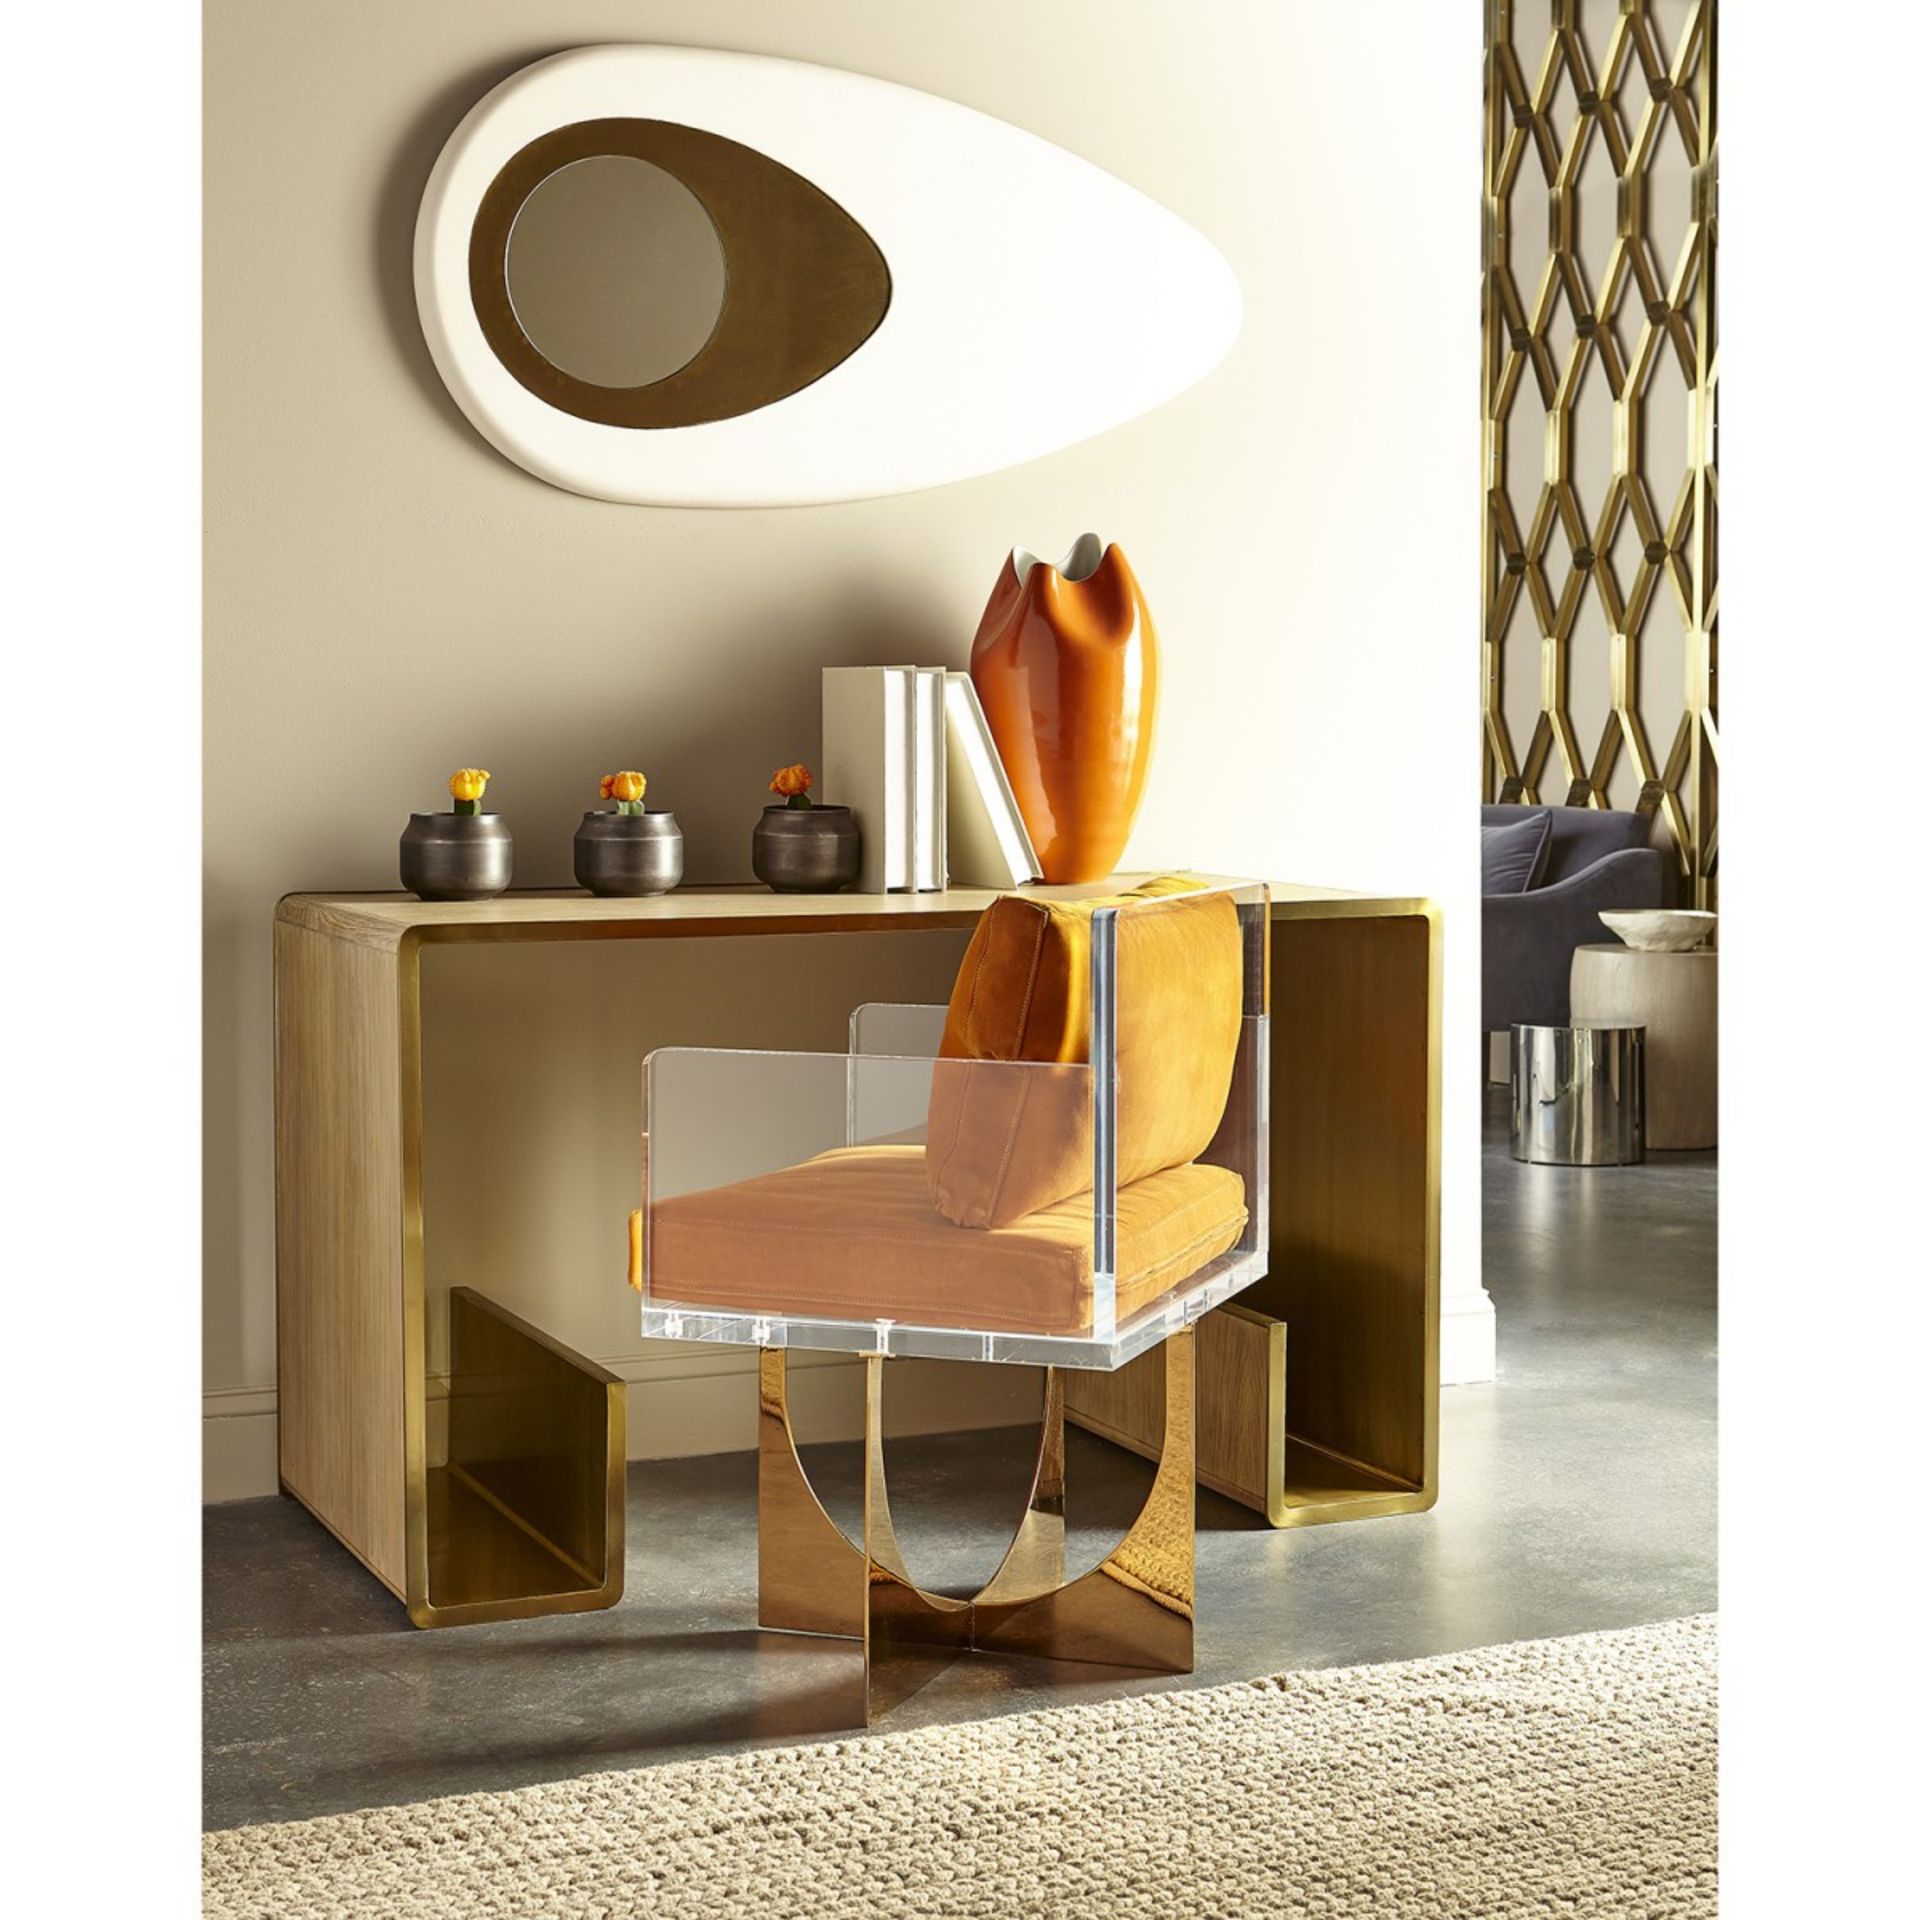 Kelly Hoppen Degas Desk A Unique Piece That Showcases Kelly’s Love For Bold Design Statements And